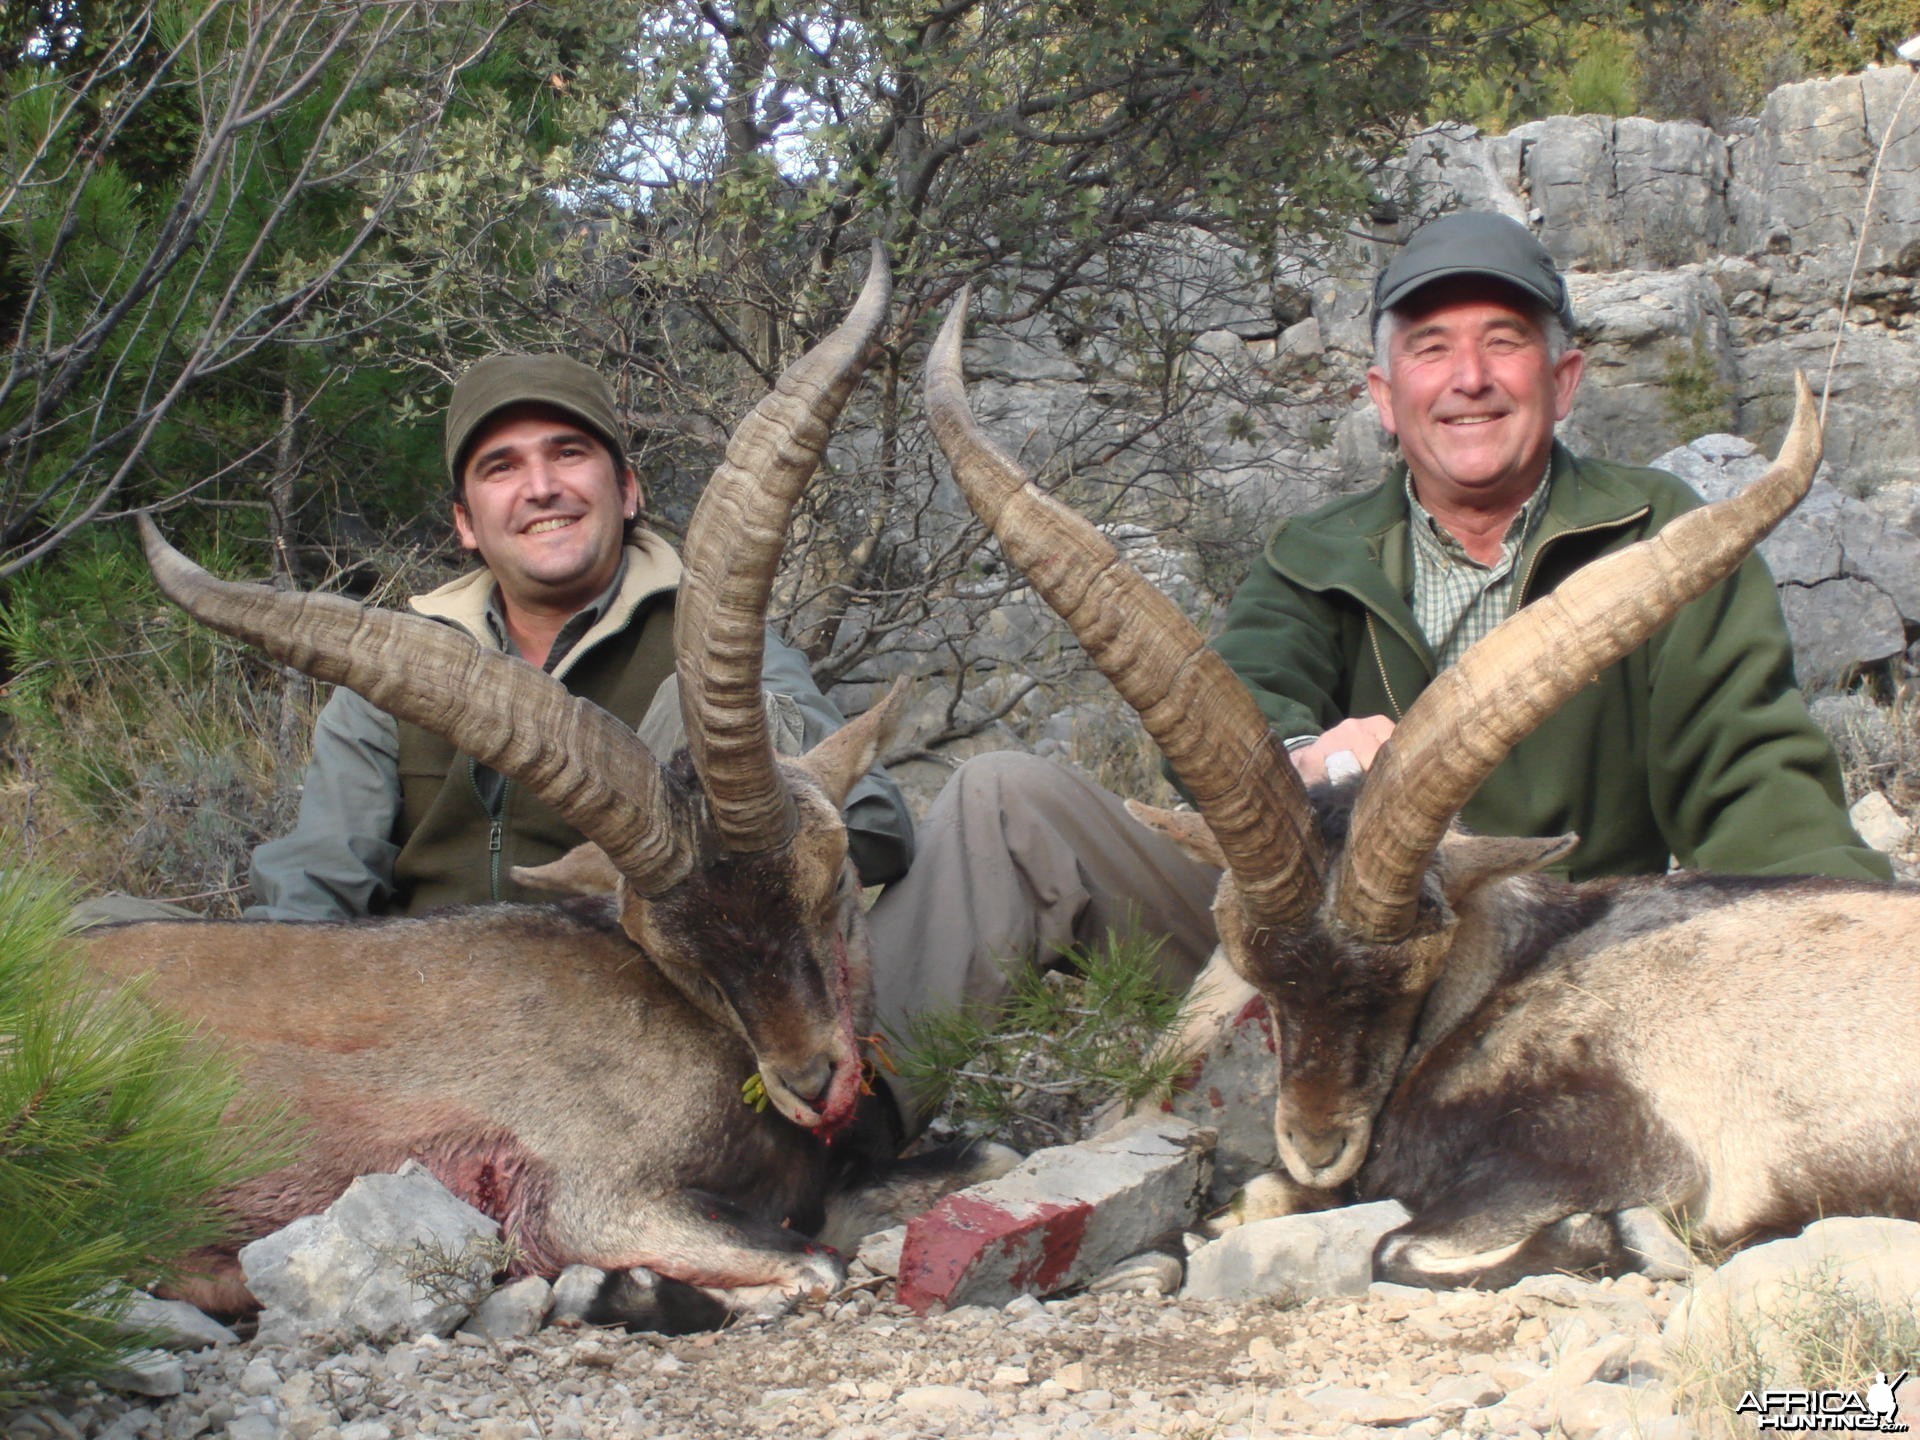 Hunting Beceite Ibex in Spain